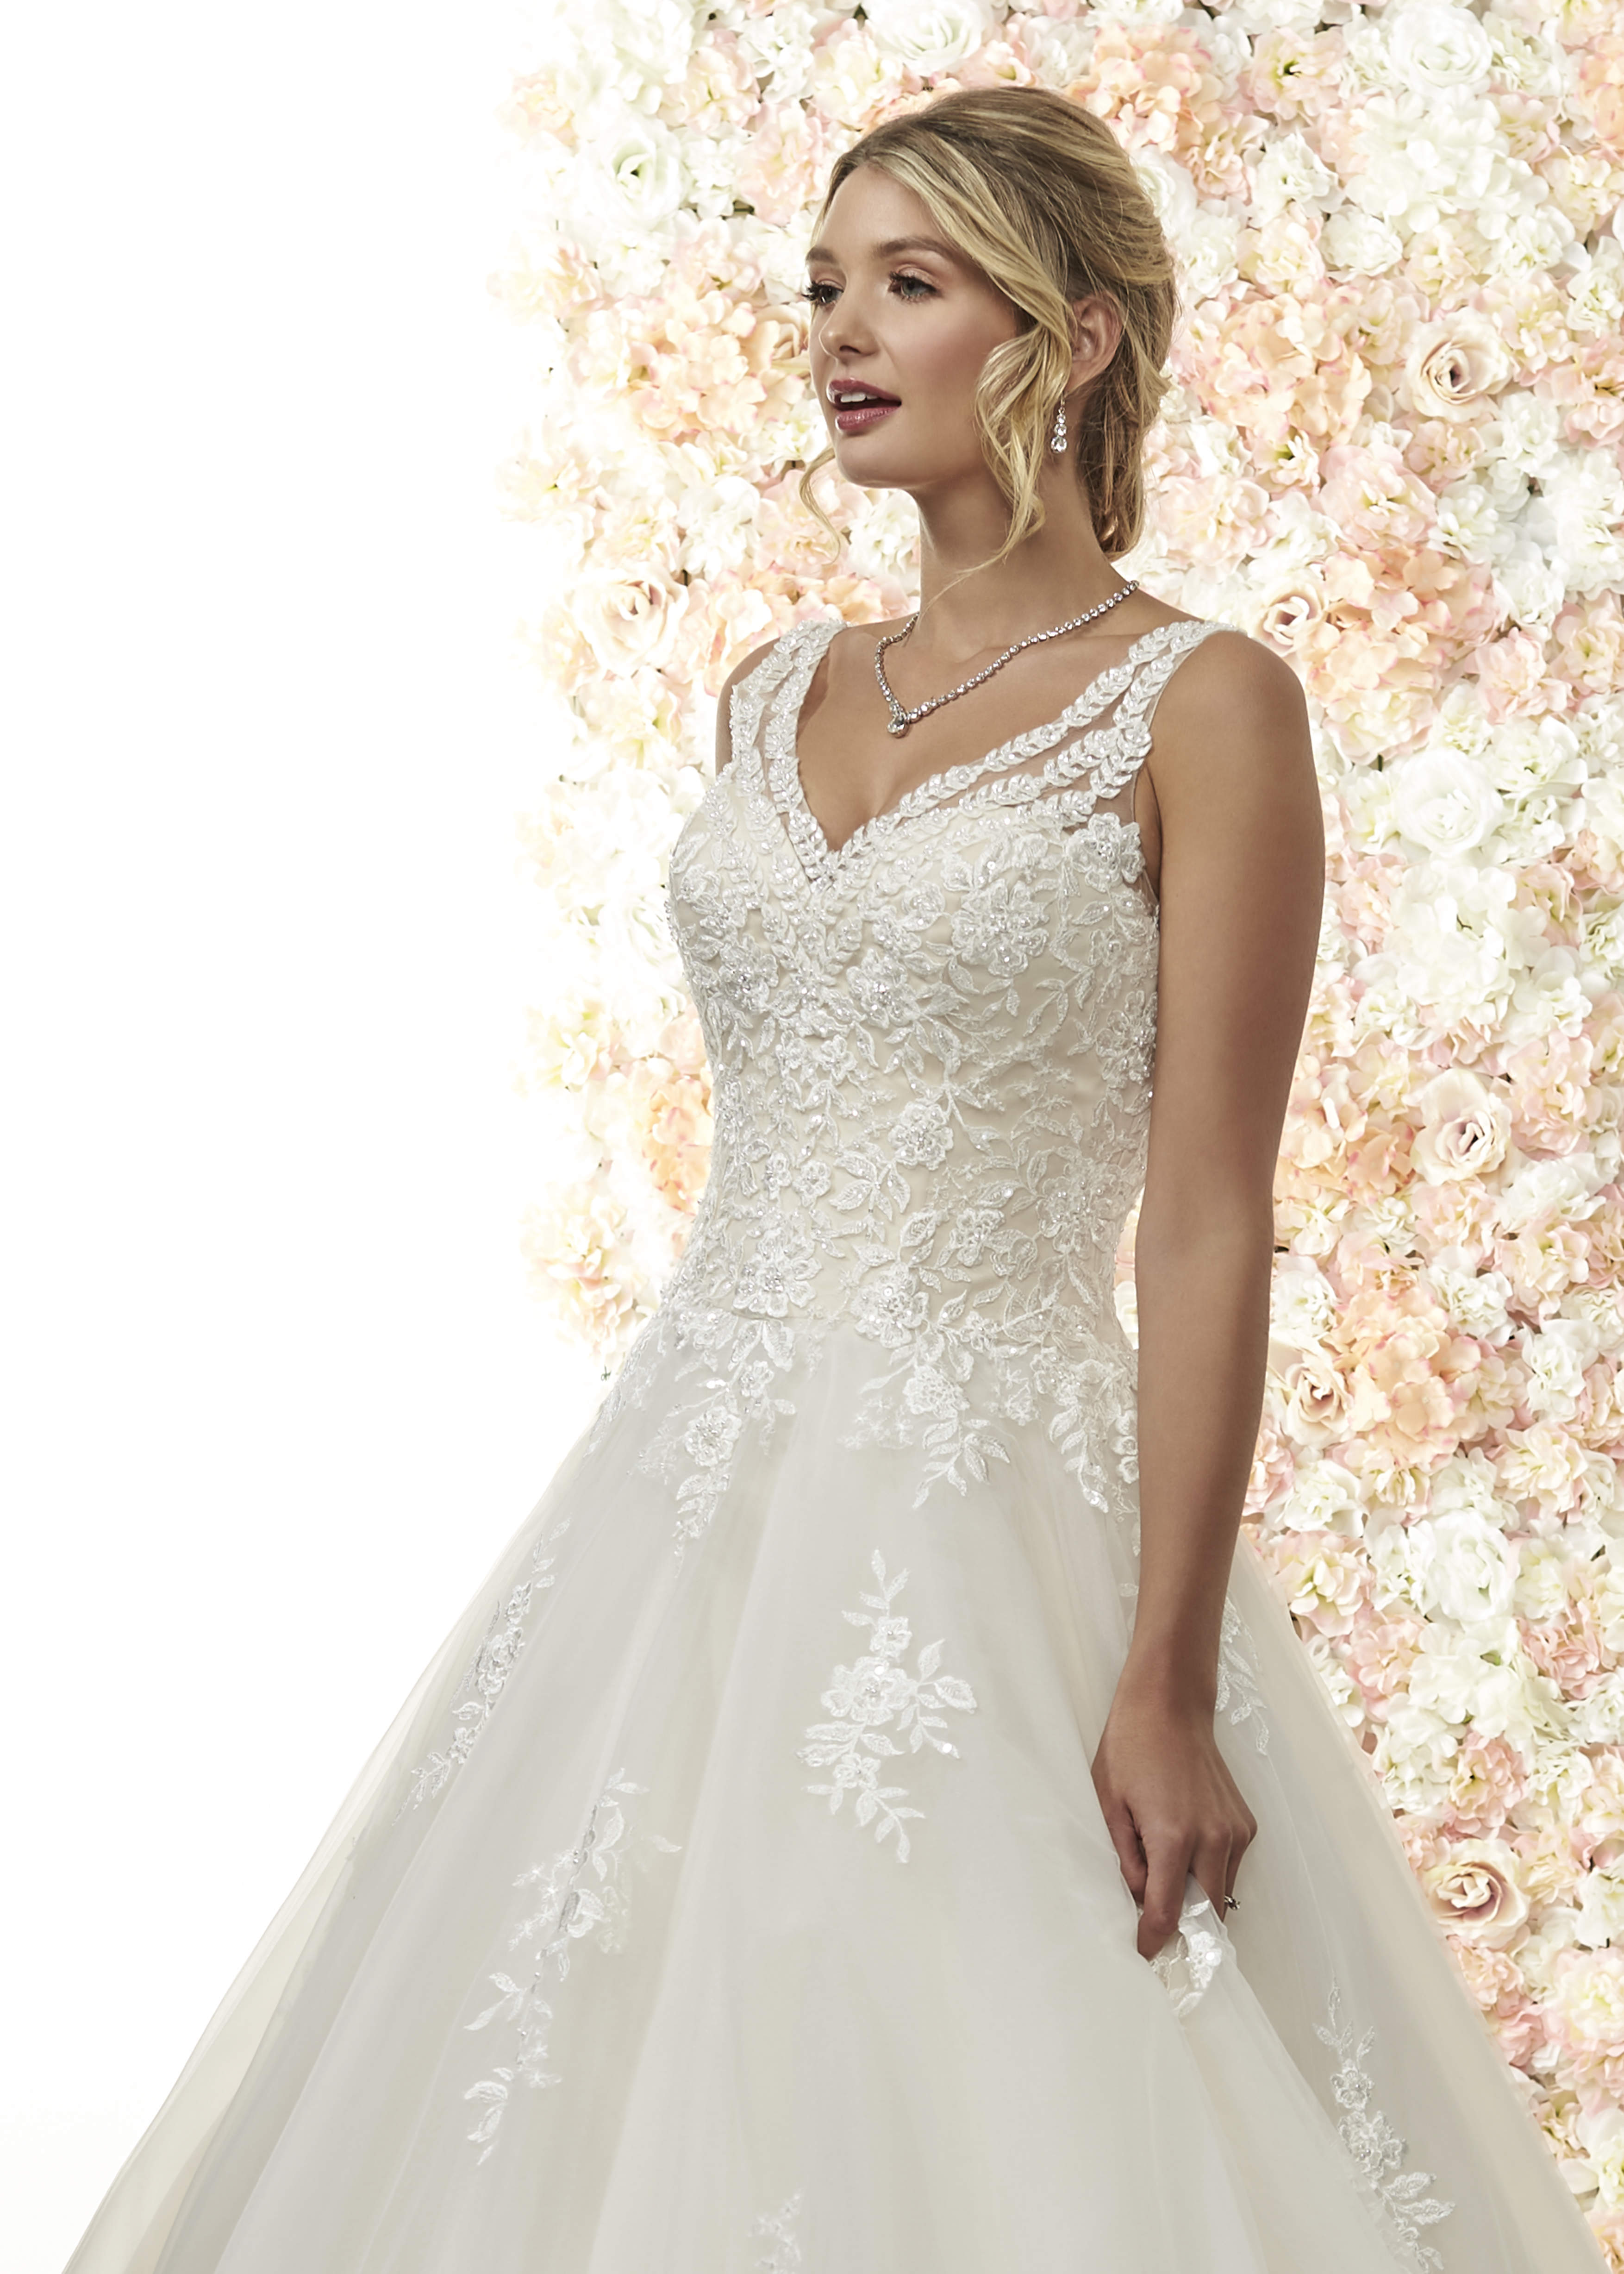 A sophisticated ballgown style, with a v neckline, illusion lace straps, lace bodice, lace motifs.